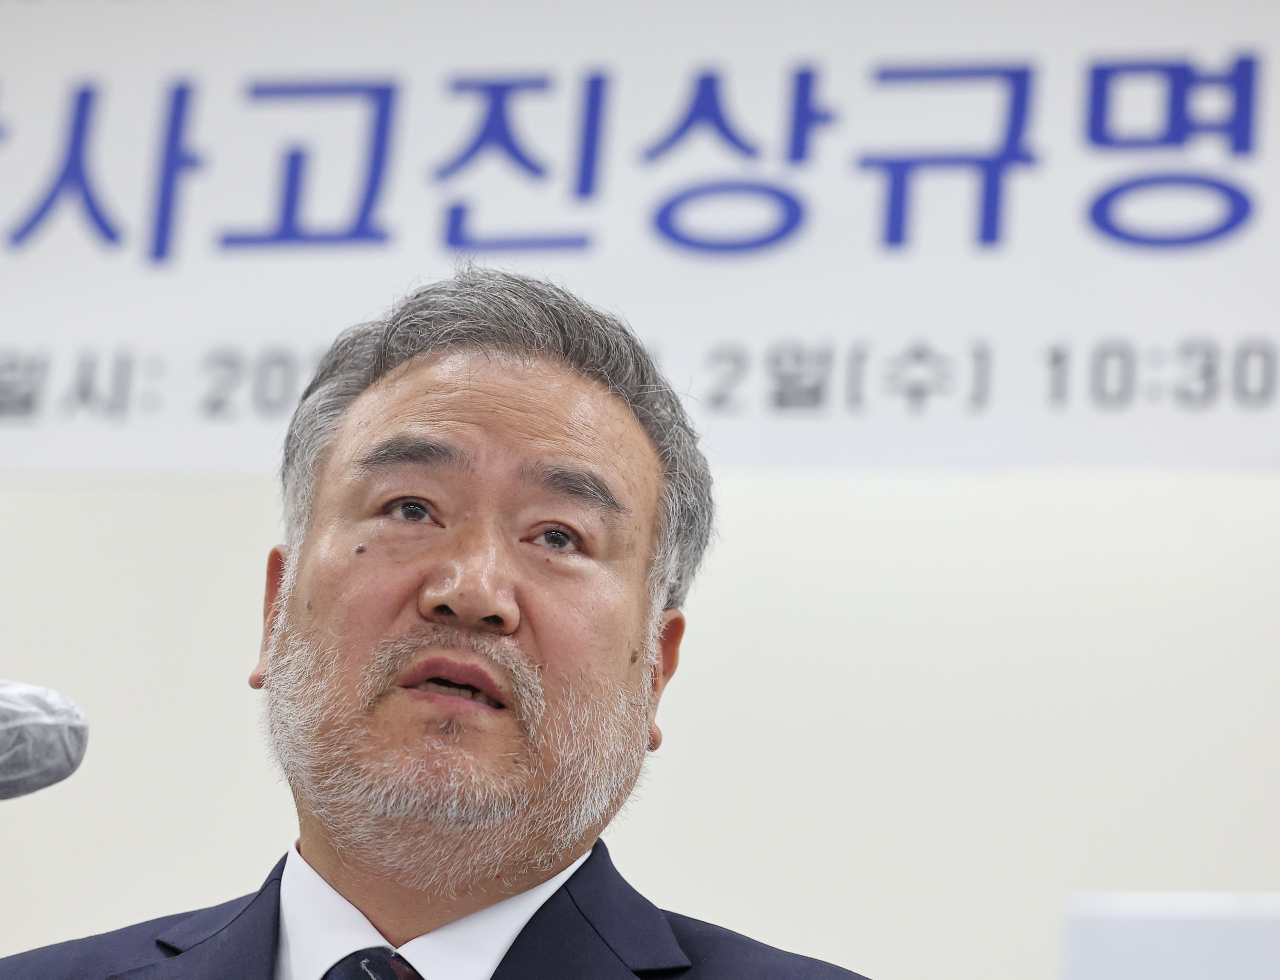 Chairman of the Presidential Truth Commission on Deaths in the Military, Song Ki-choon, speaks to the media during a news conference held on Wednesday in Seoul. (Photo - Yonhap)